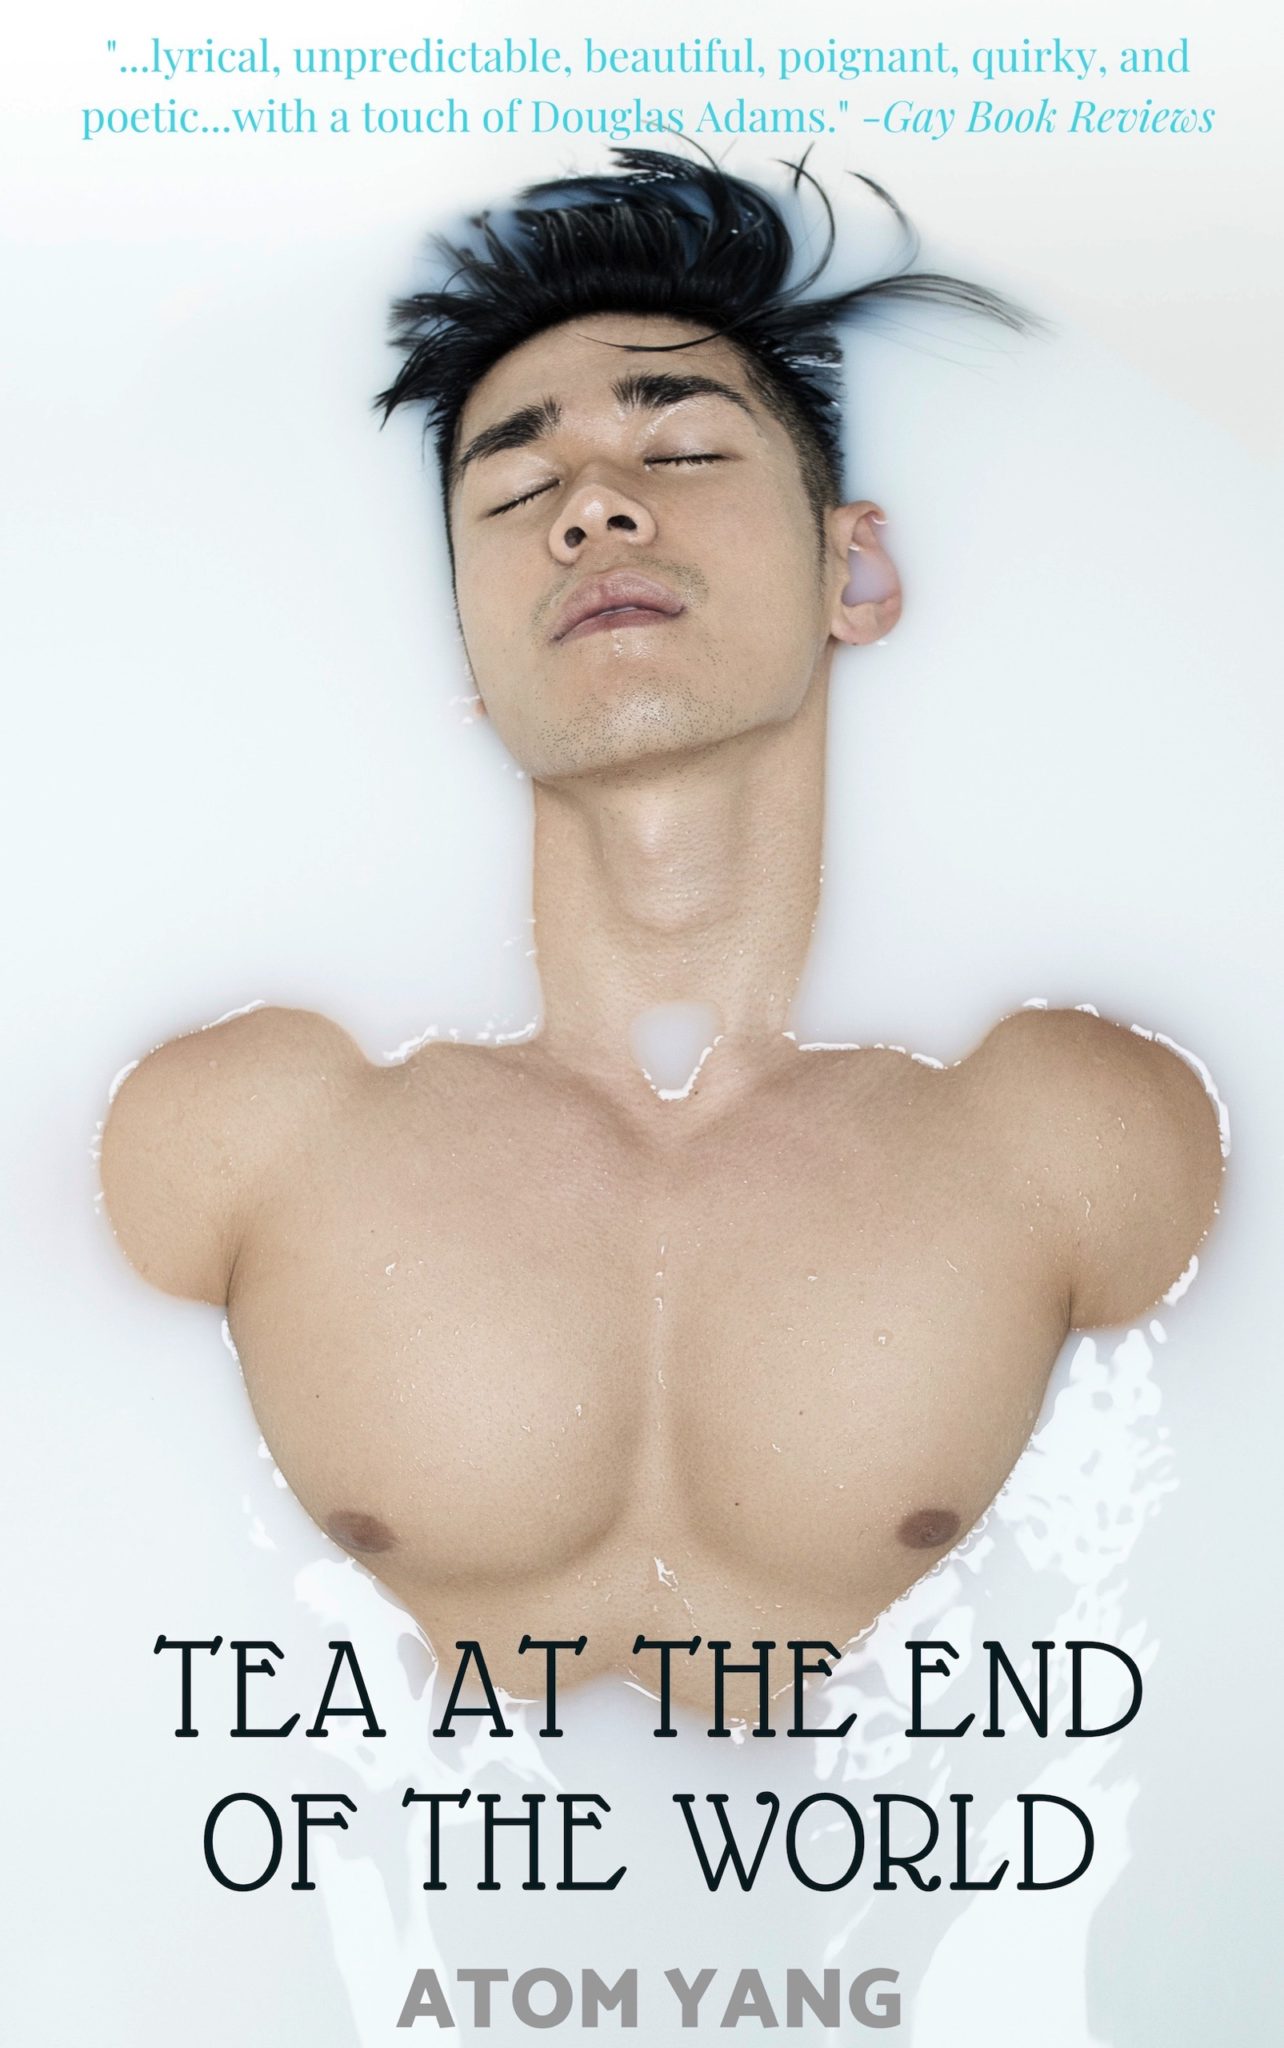 Cover of Tea at the End of the World depicting a handsome, young Asian man partially submerged in a white liquid with his eyes closed and face, neck, and chest above the liquid.